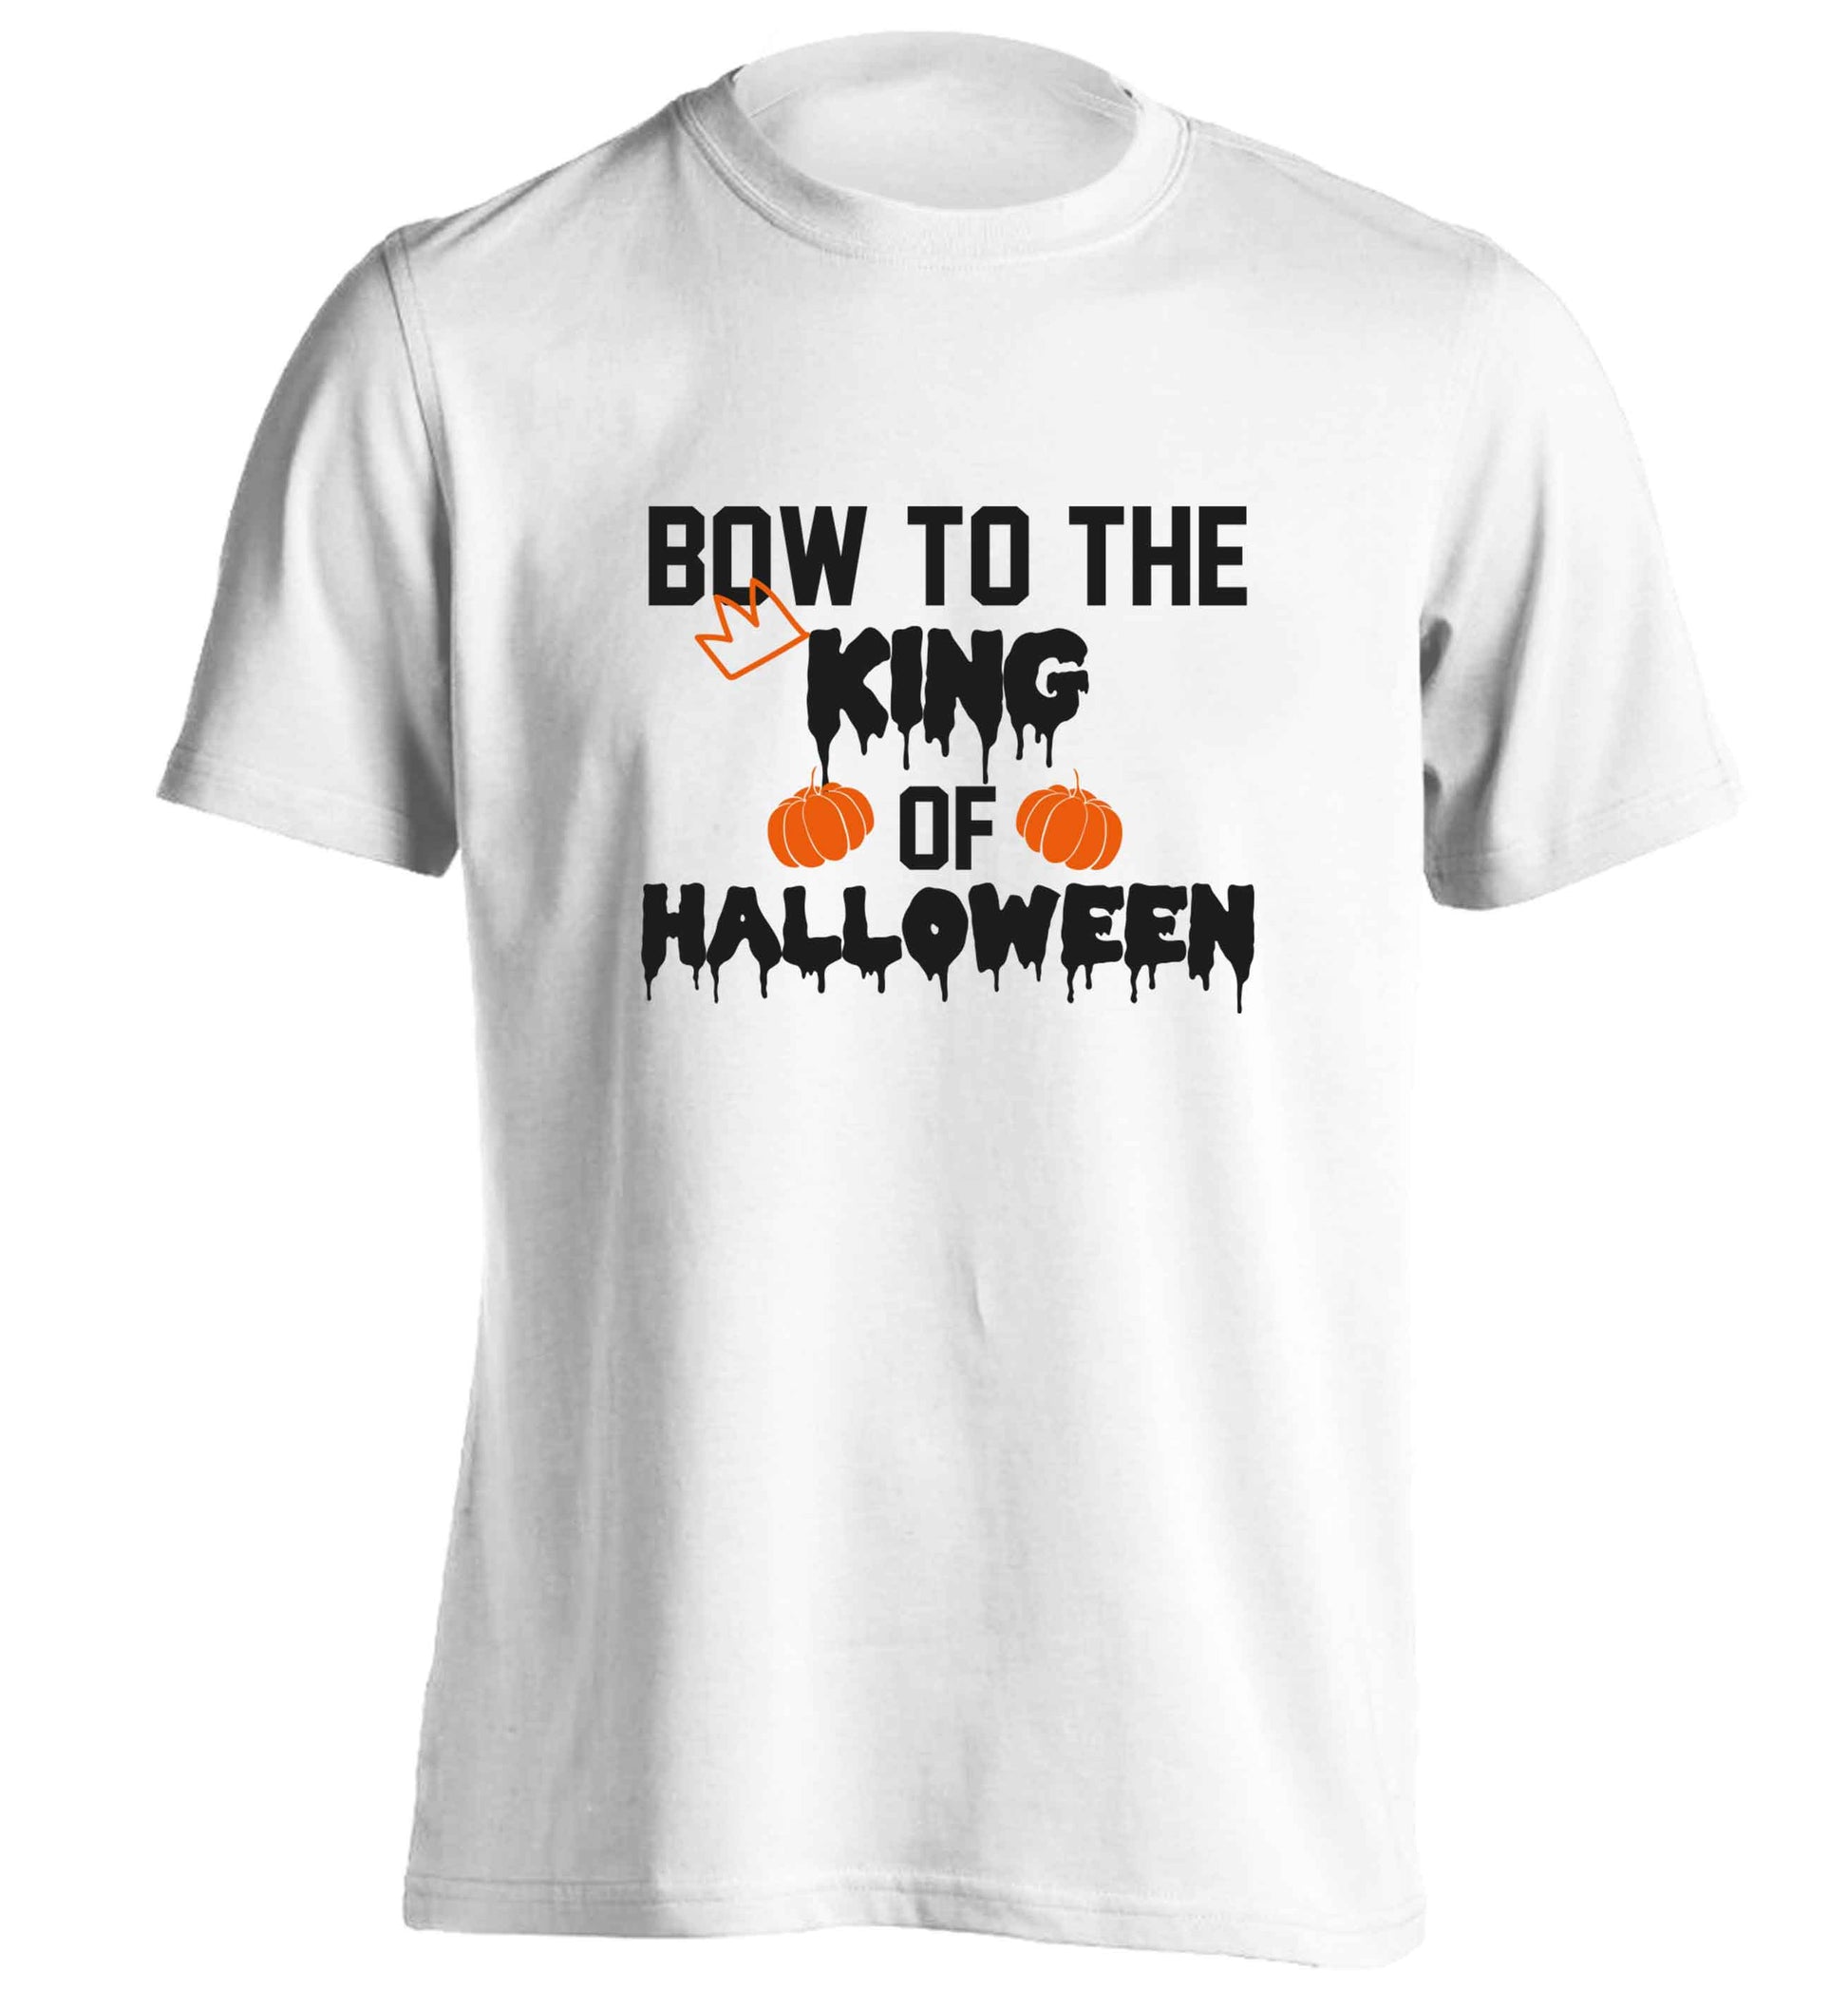 Bow to the King of halloween adults unisex white Tshirt 2XL